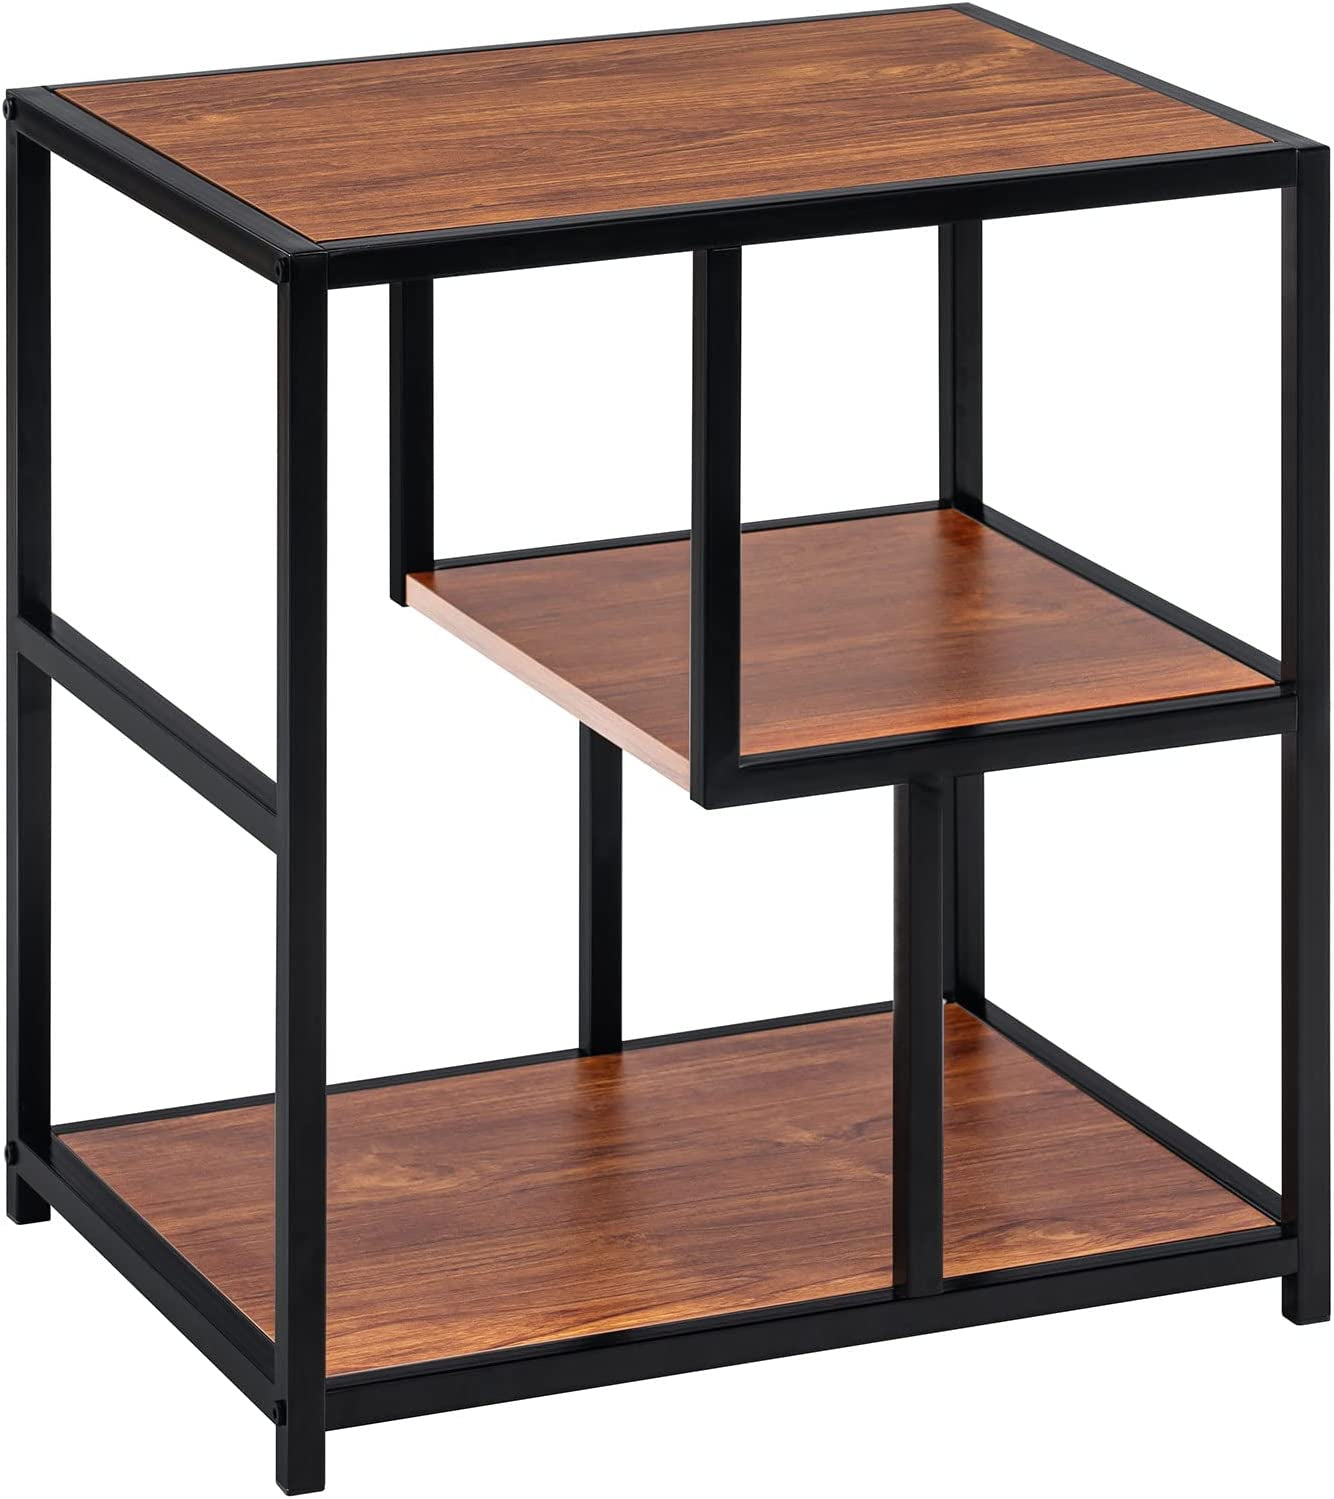 Side Table Brown, Industrial Coffee End Table, Metal Frame Bedside Table with Storage Compartment, Nightstand for Living Room Bedroom and Balcony, Wooden, 56 X 40 X 53 Cm